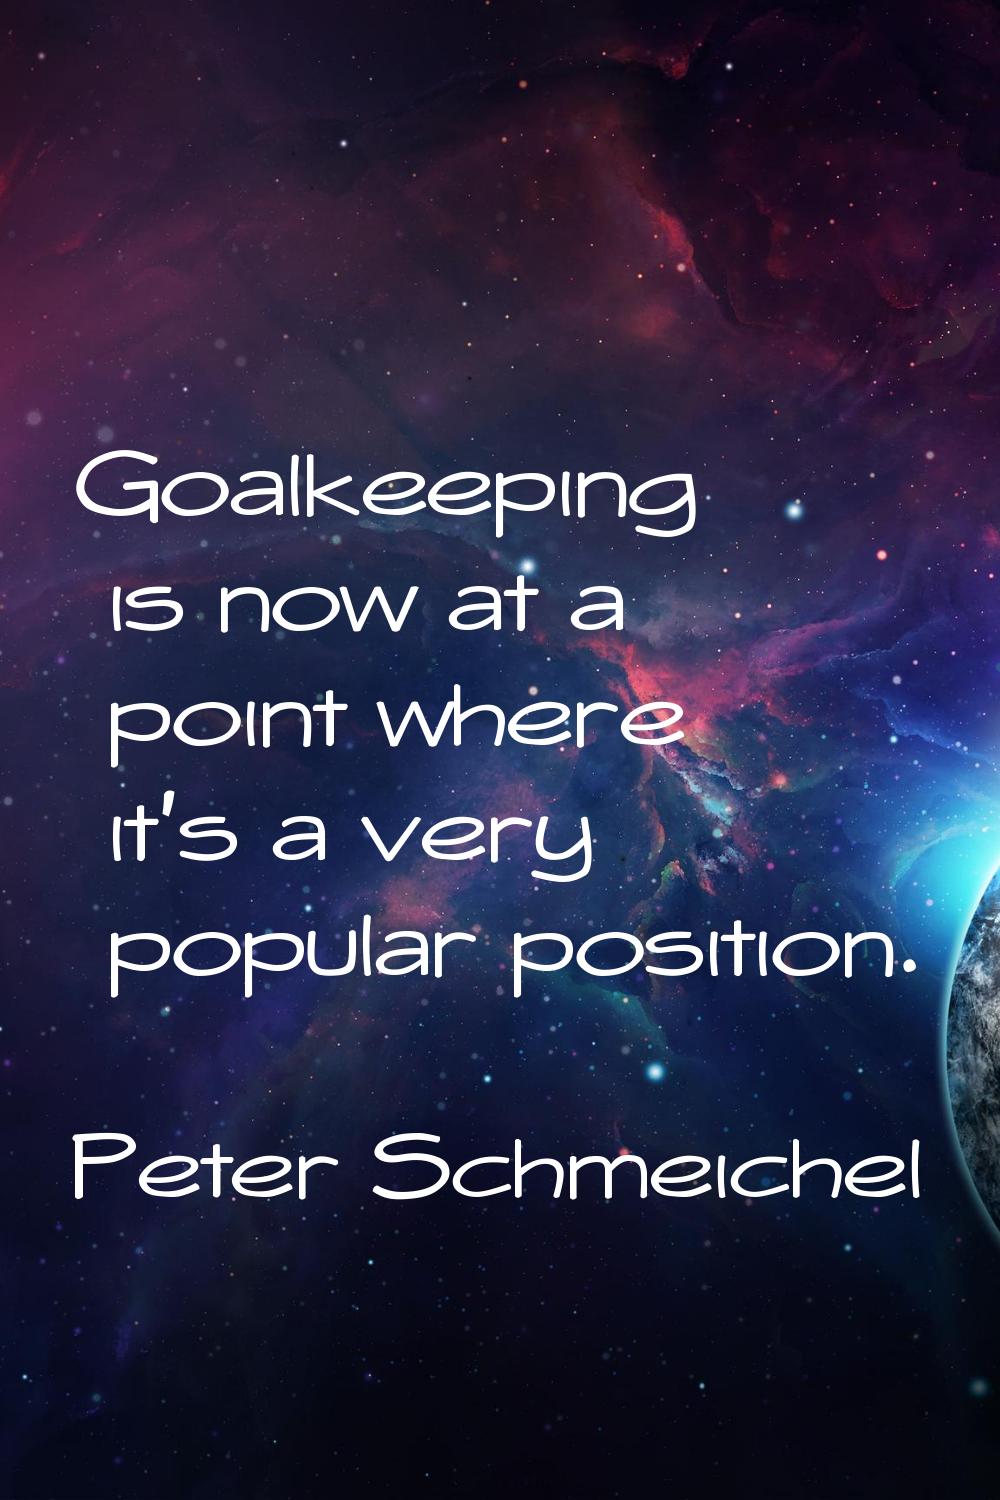 Goalkeeping is now at a point where it's a very popular position.